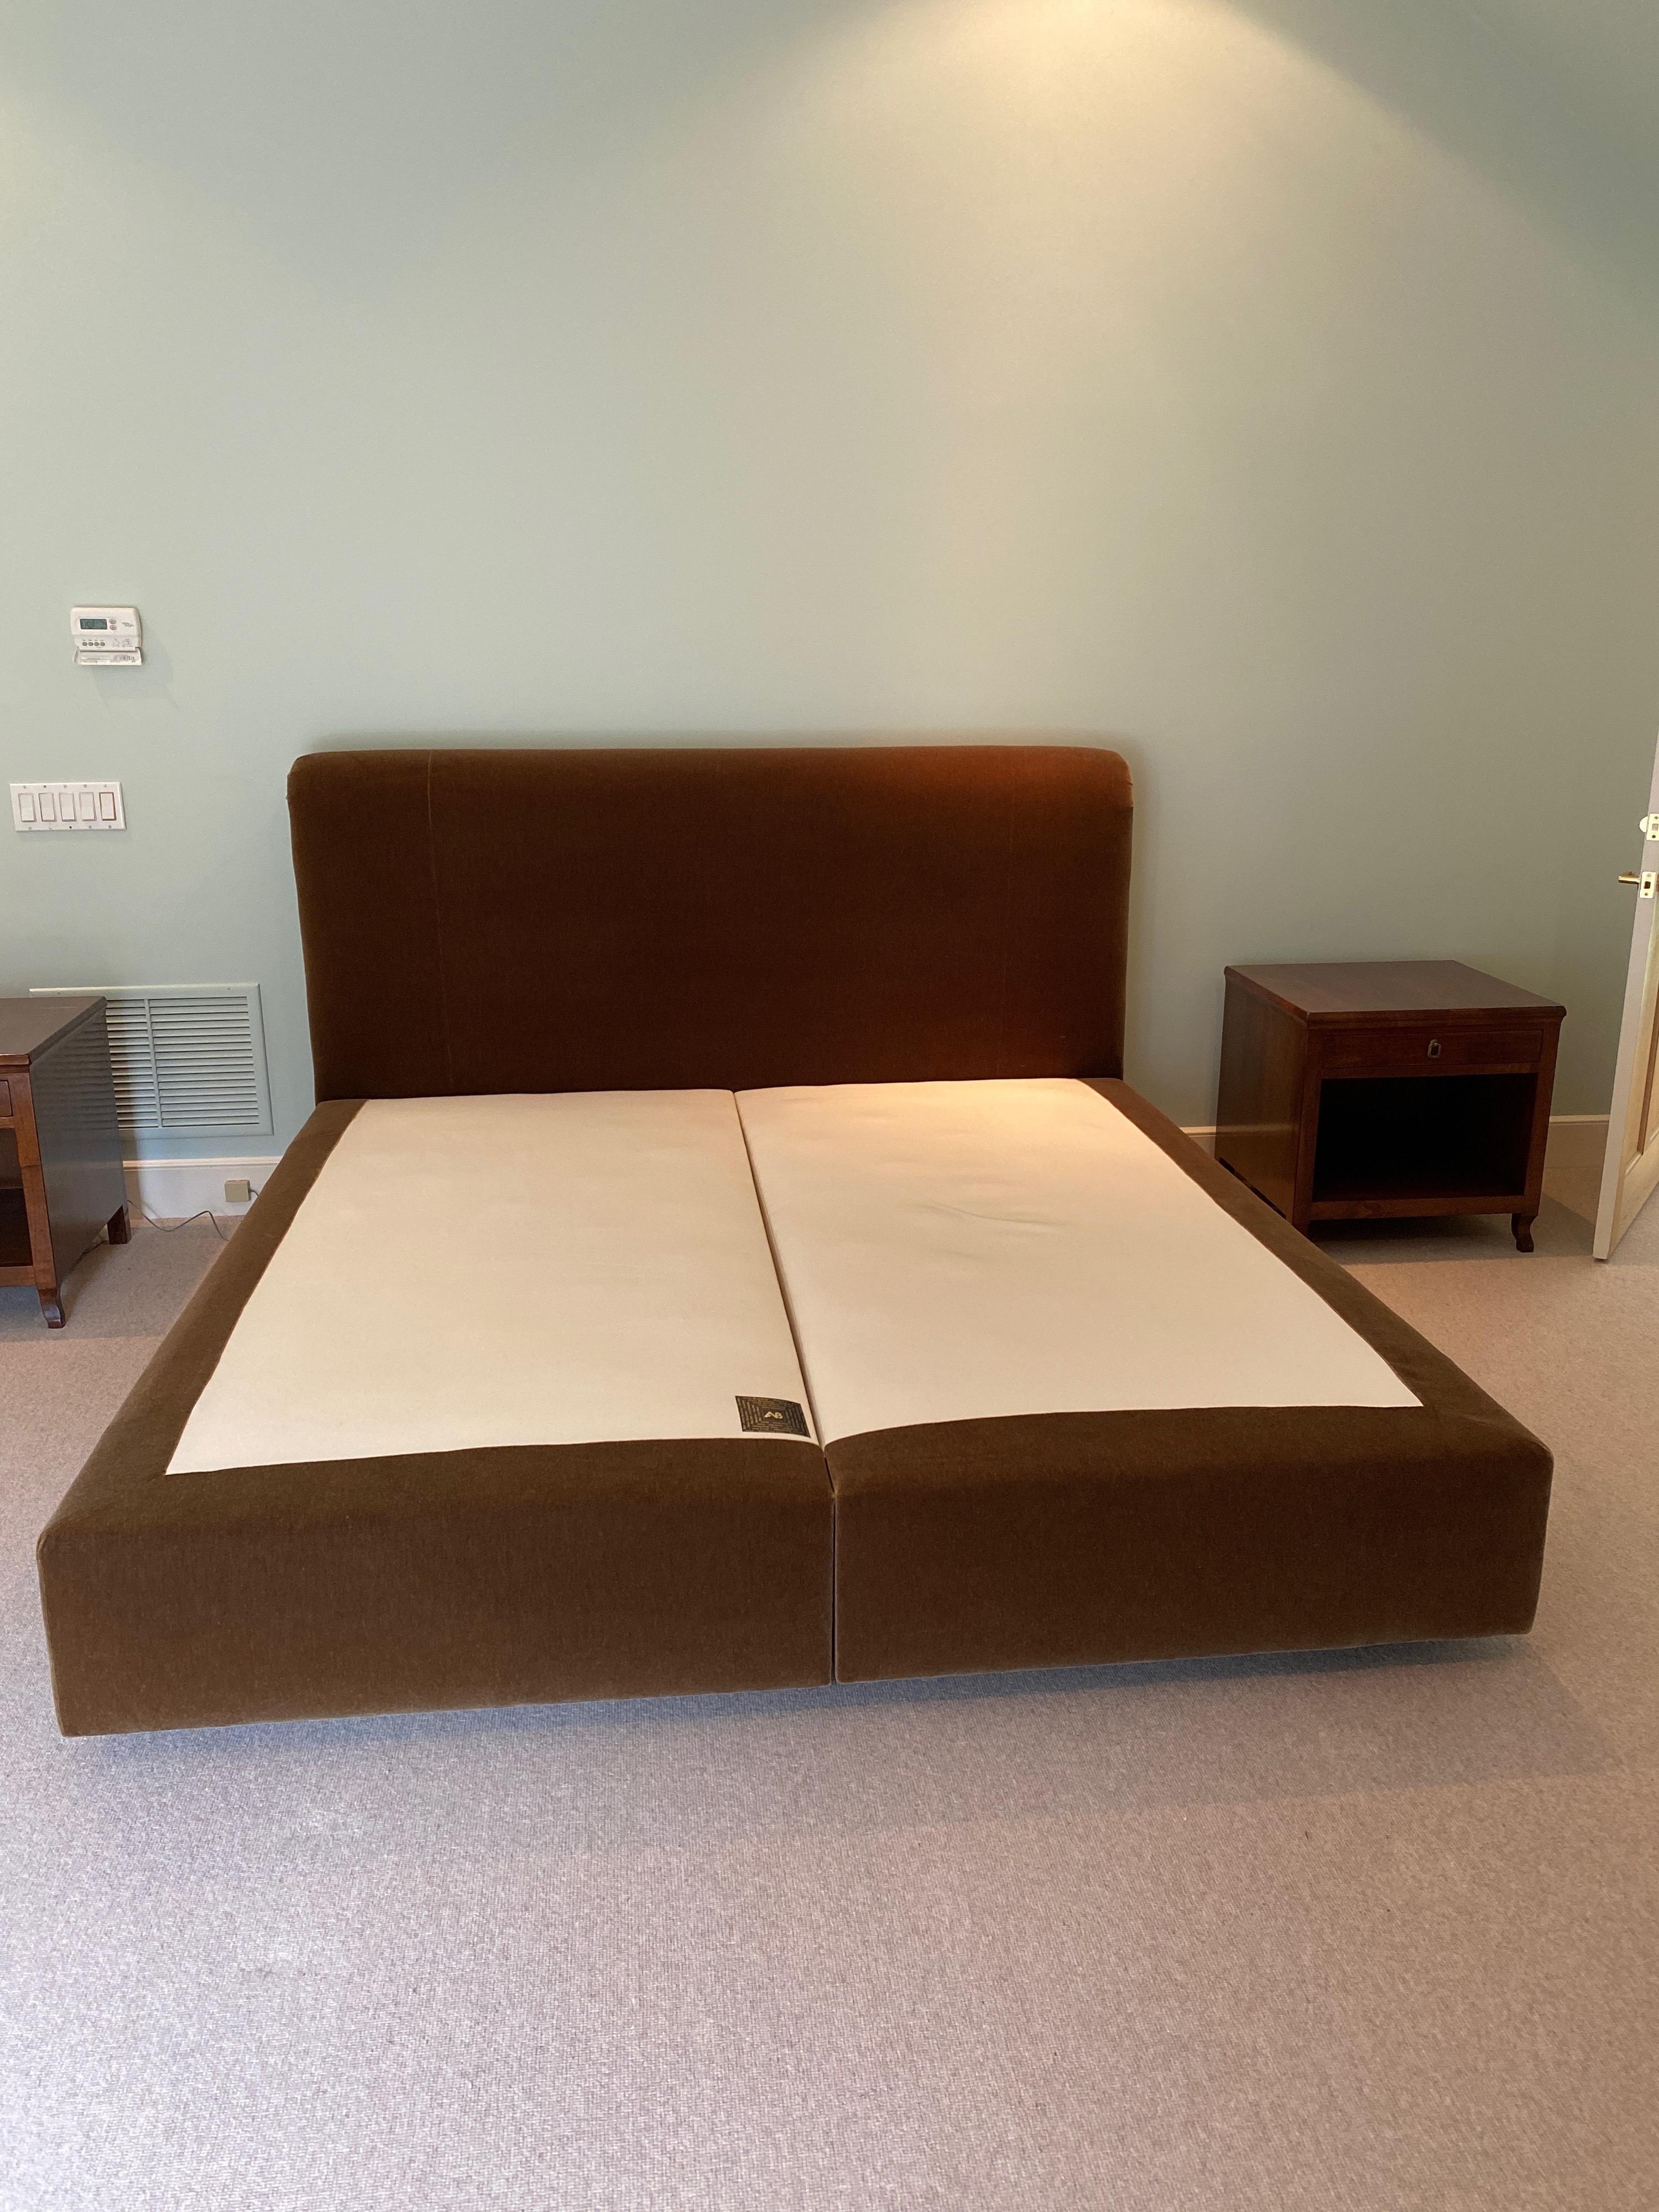 King size Avery Boardman brown mohair upholstered bed frame in mint condition, custom made.

Measures: 45” H x 84” L x 79” W

14.25” floor to top of box spring.